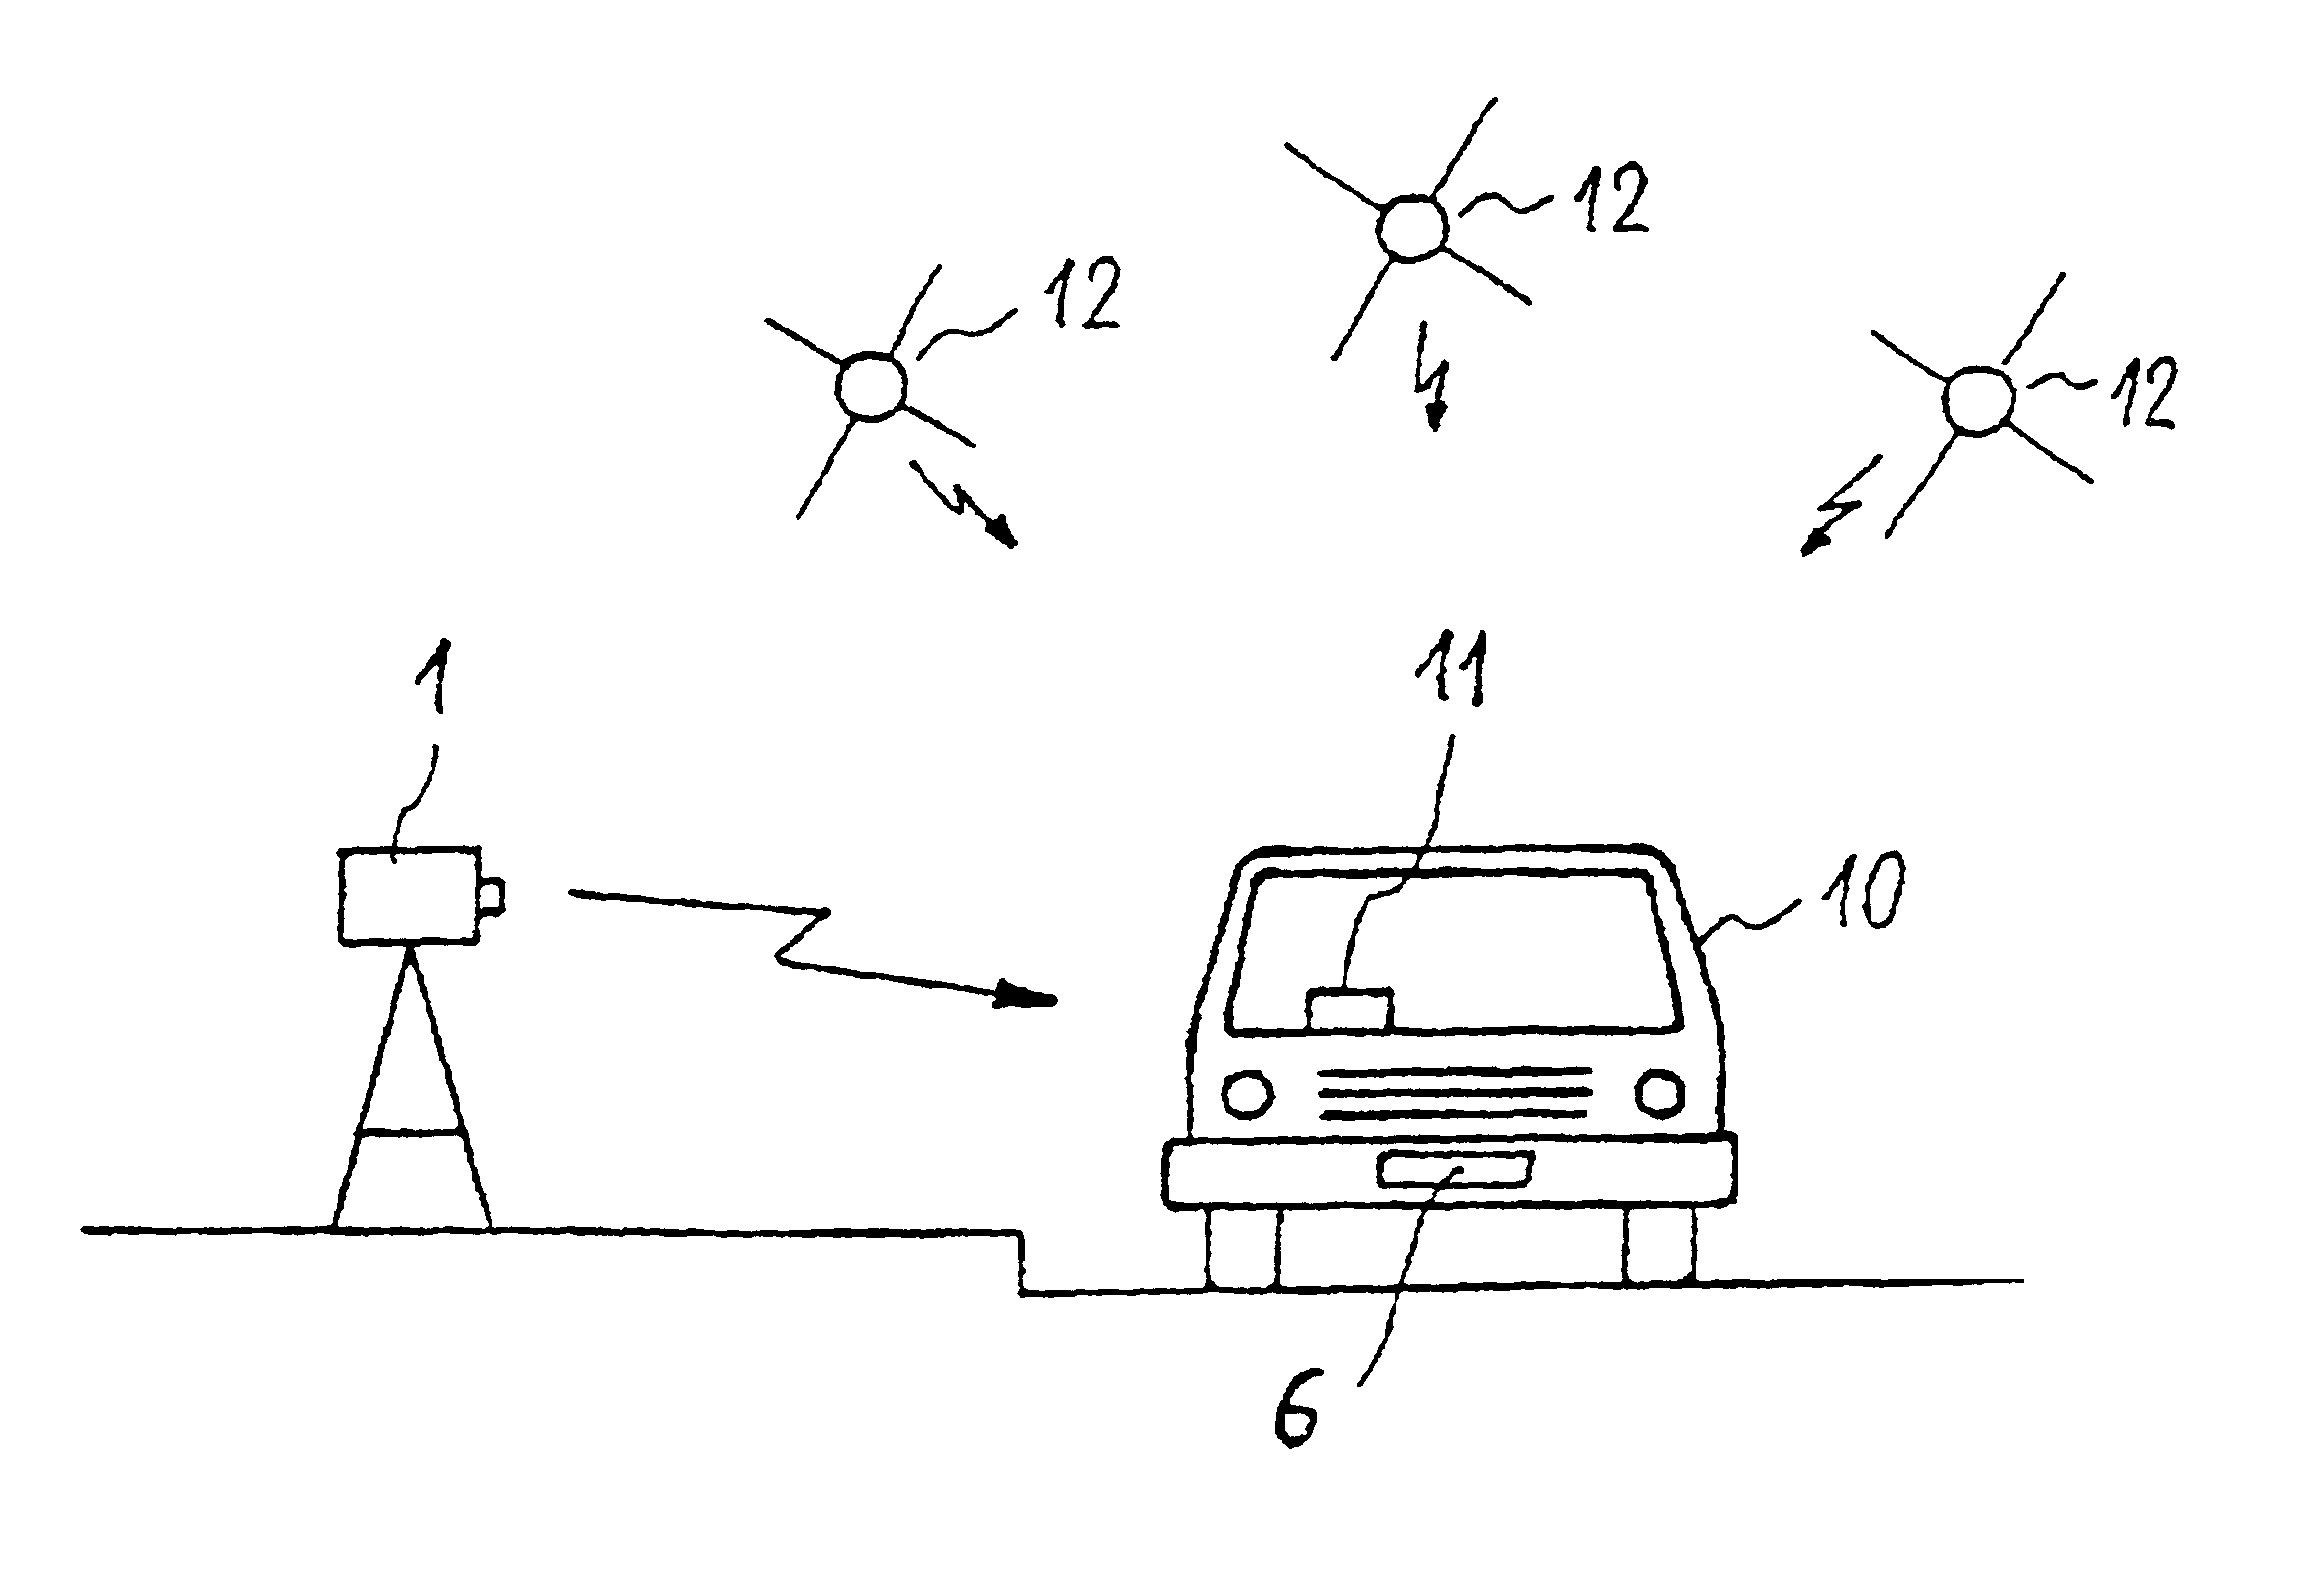 Roadside control device for a toll apparatus installed in a motor vehicle